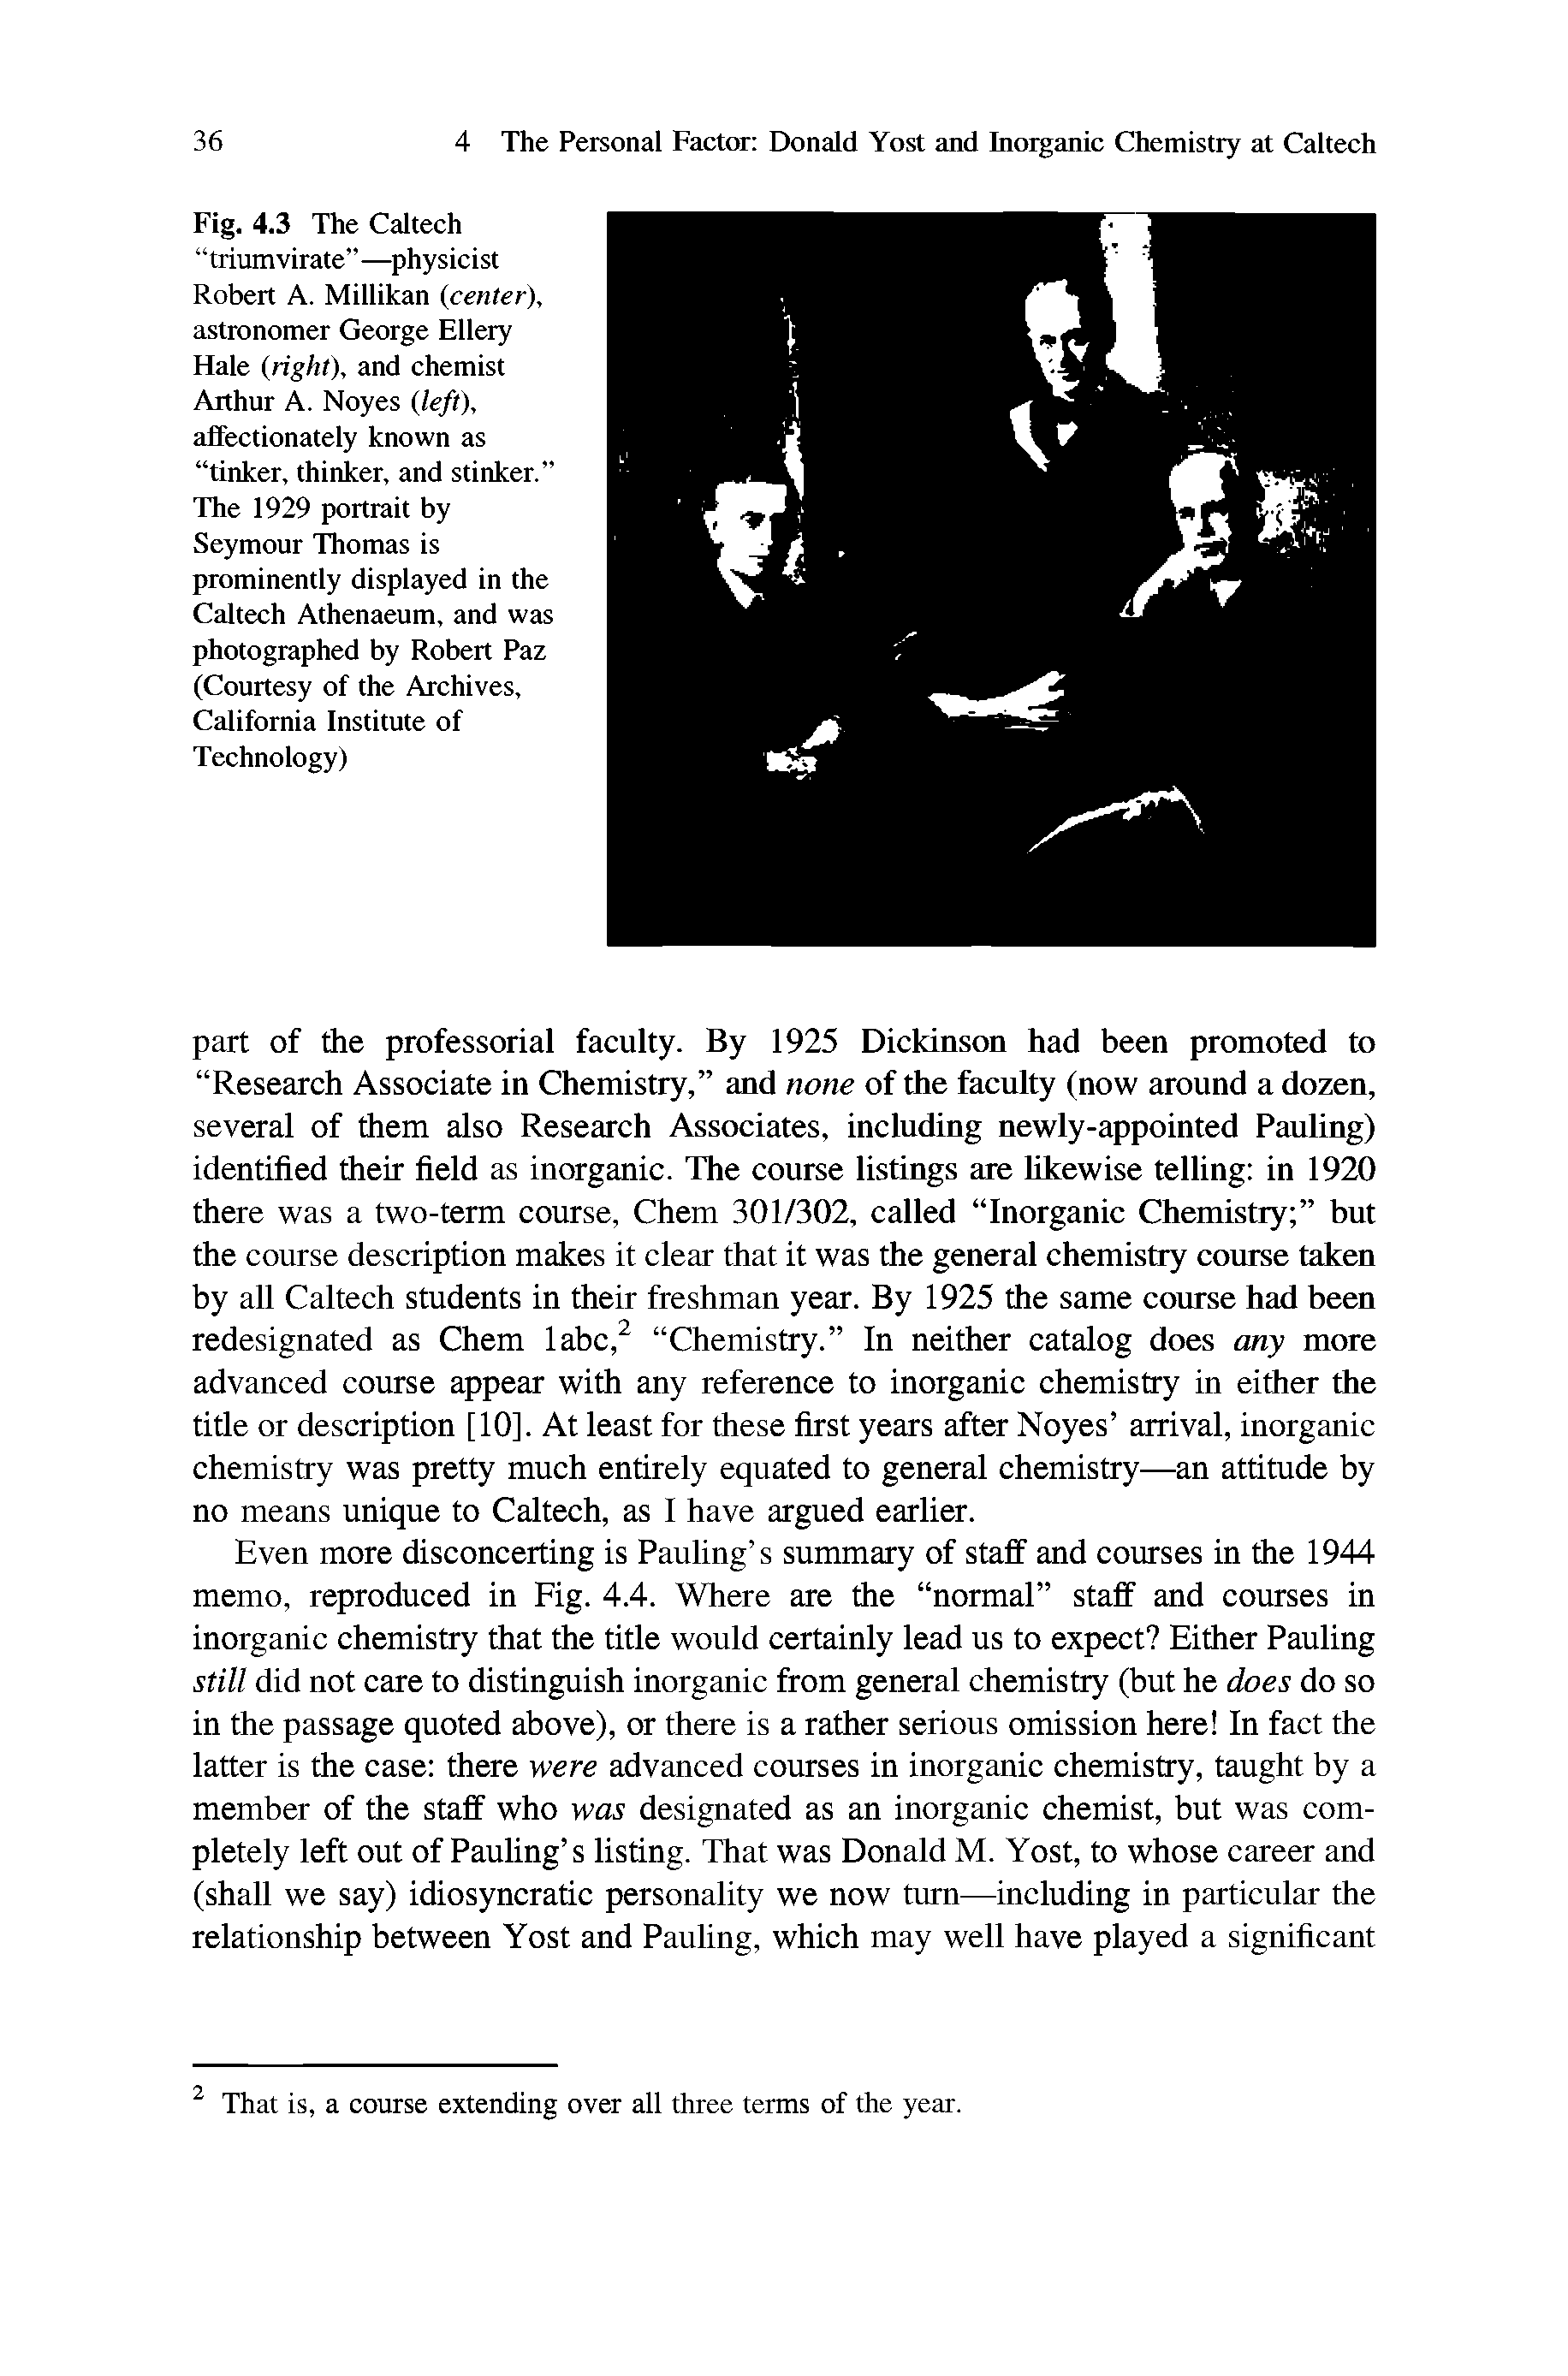 Fig. 4.3 The Caltech triumvirate —physicist Robert A. Millikan (center), astronomer George Ellery Hale (right), and chemist Arthur A. Noyes (left), affectionately known as tinker, thinker, and stinker. The 1929 portrait by Seymour Thomas is prominently displayed in the Caltech Athenaeum, and was photographed by Robert Paz (Courtesy of the Archives, California Institute of Technology)...